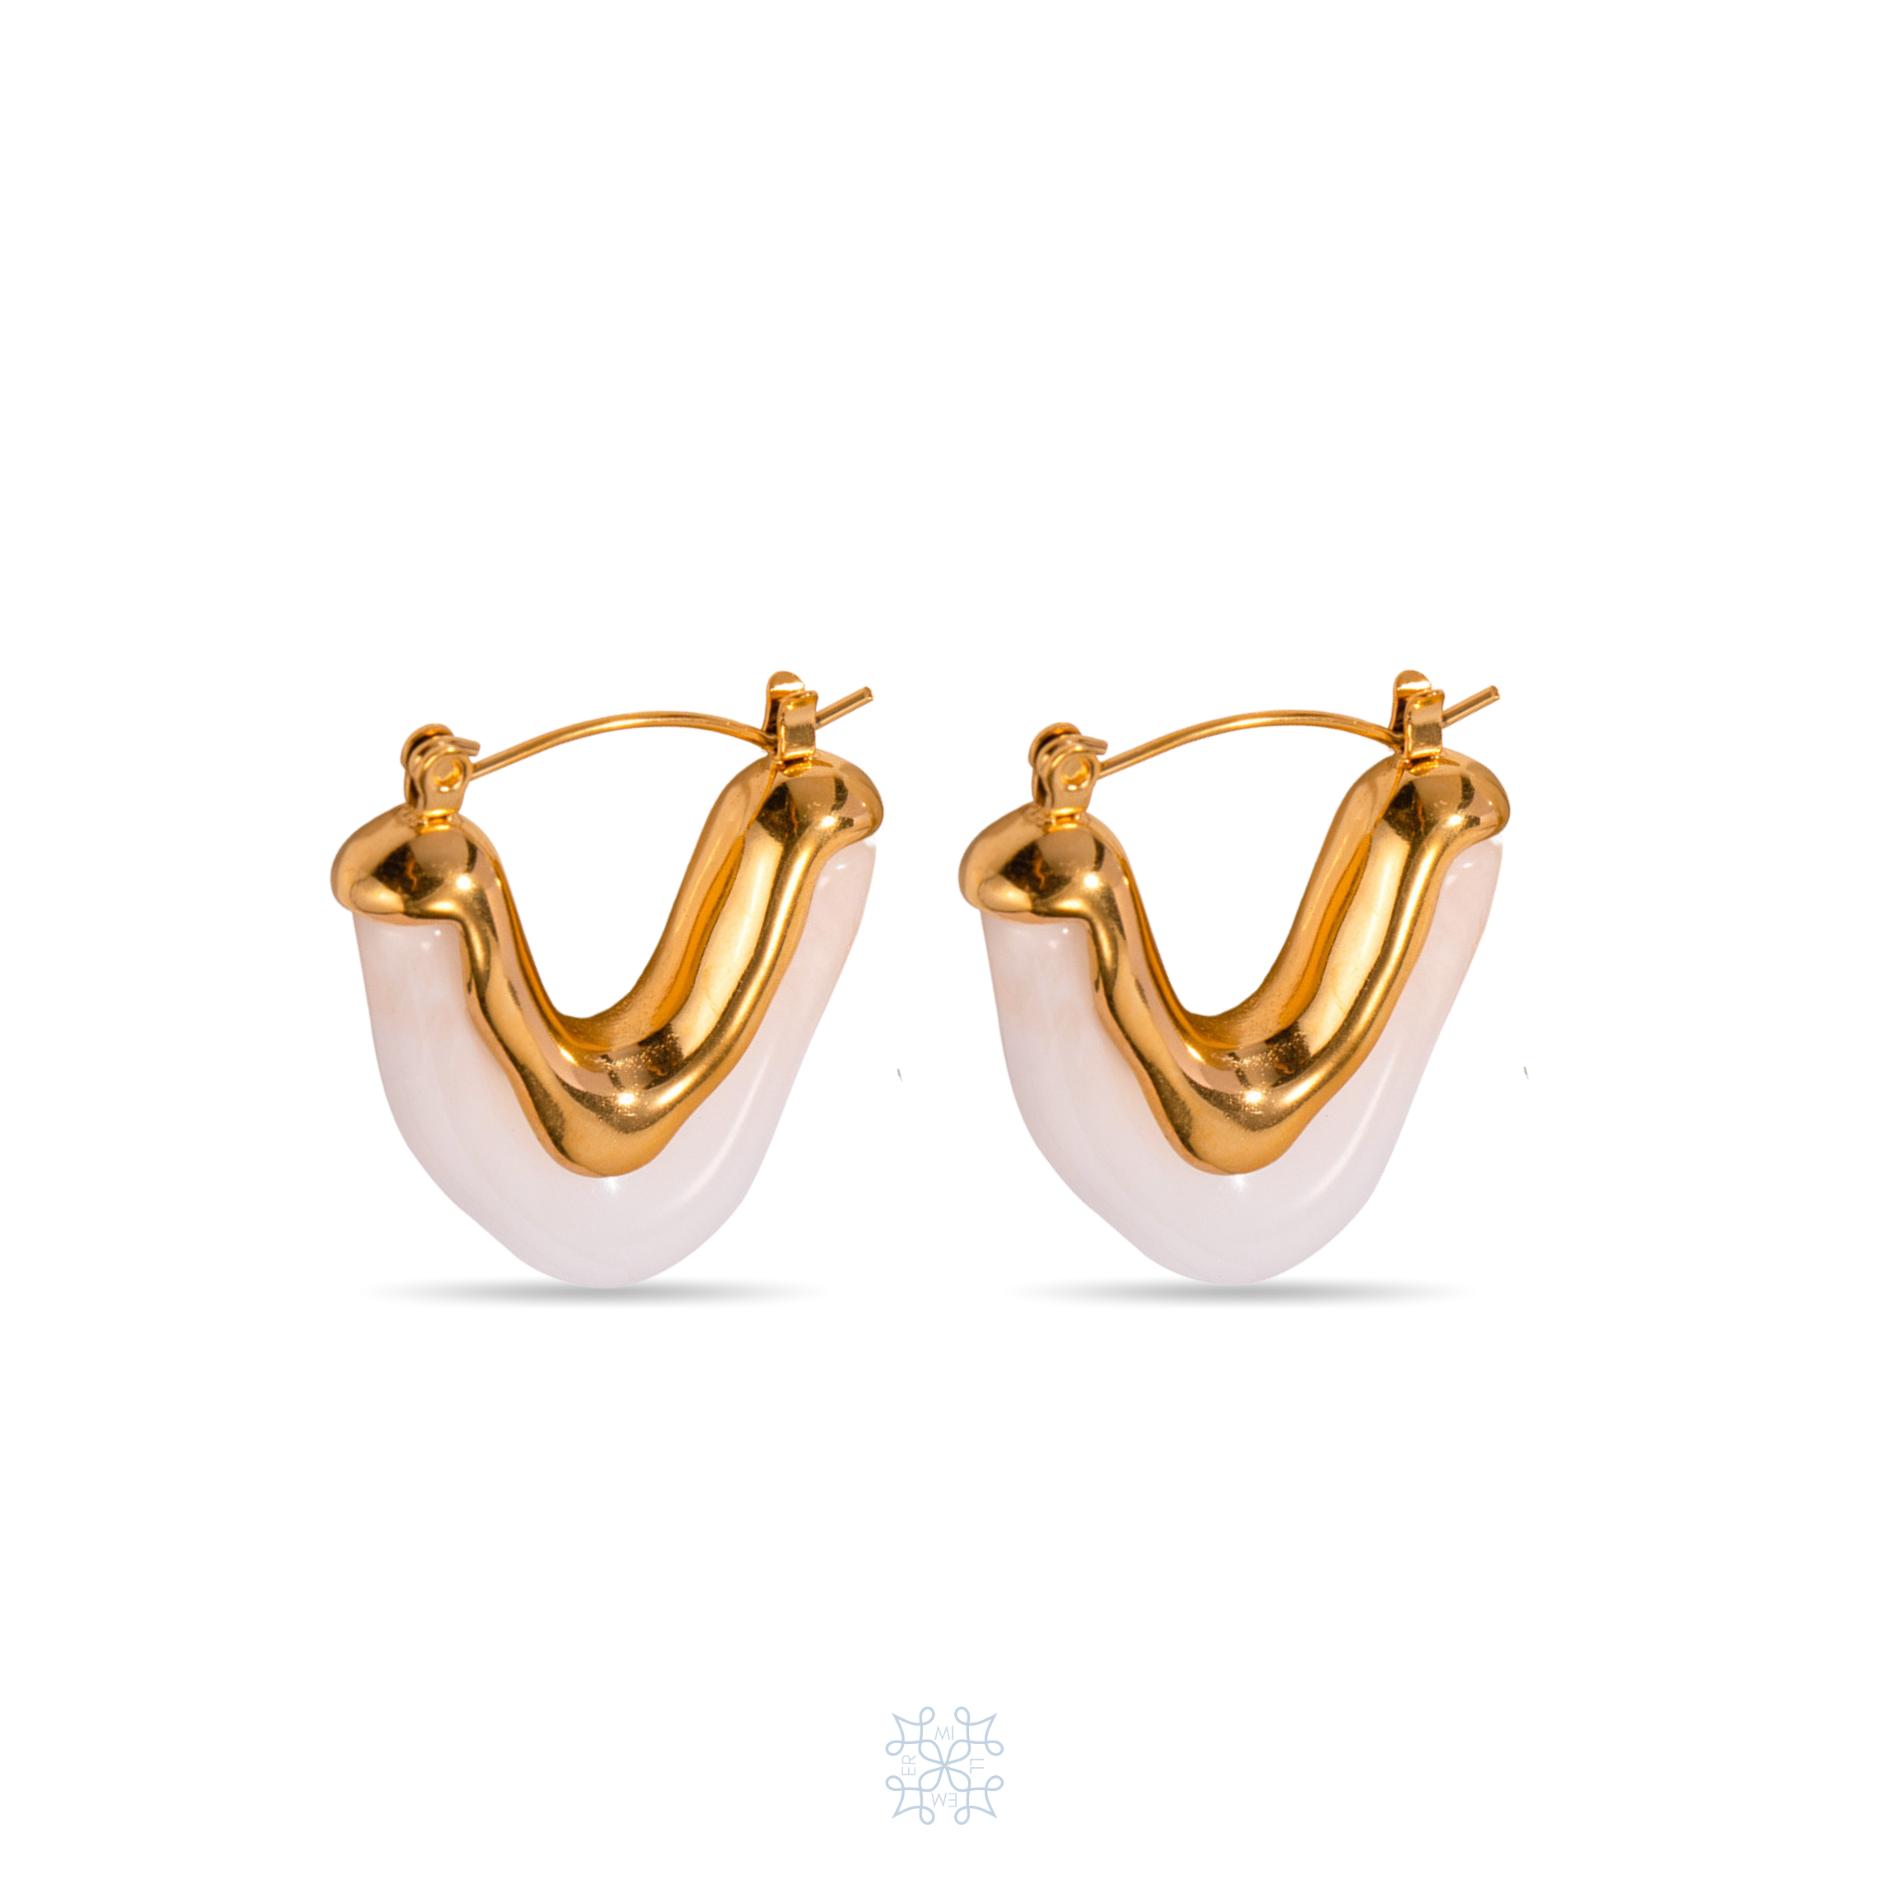 Gold Waterproof Earrings, V shape in gold metalic with white Acrylic. 